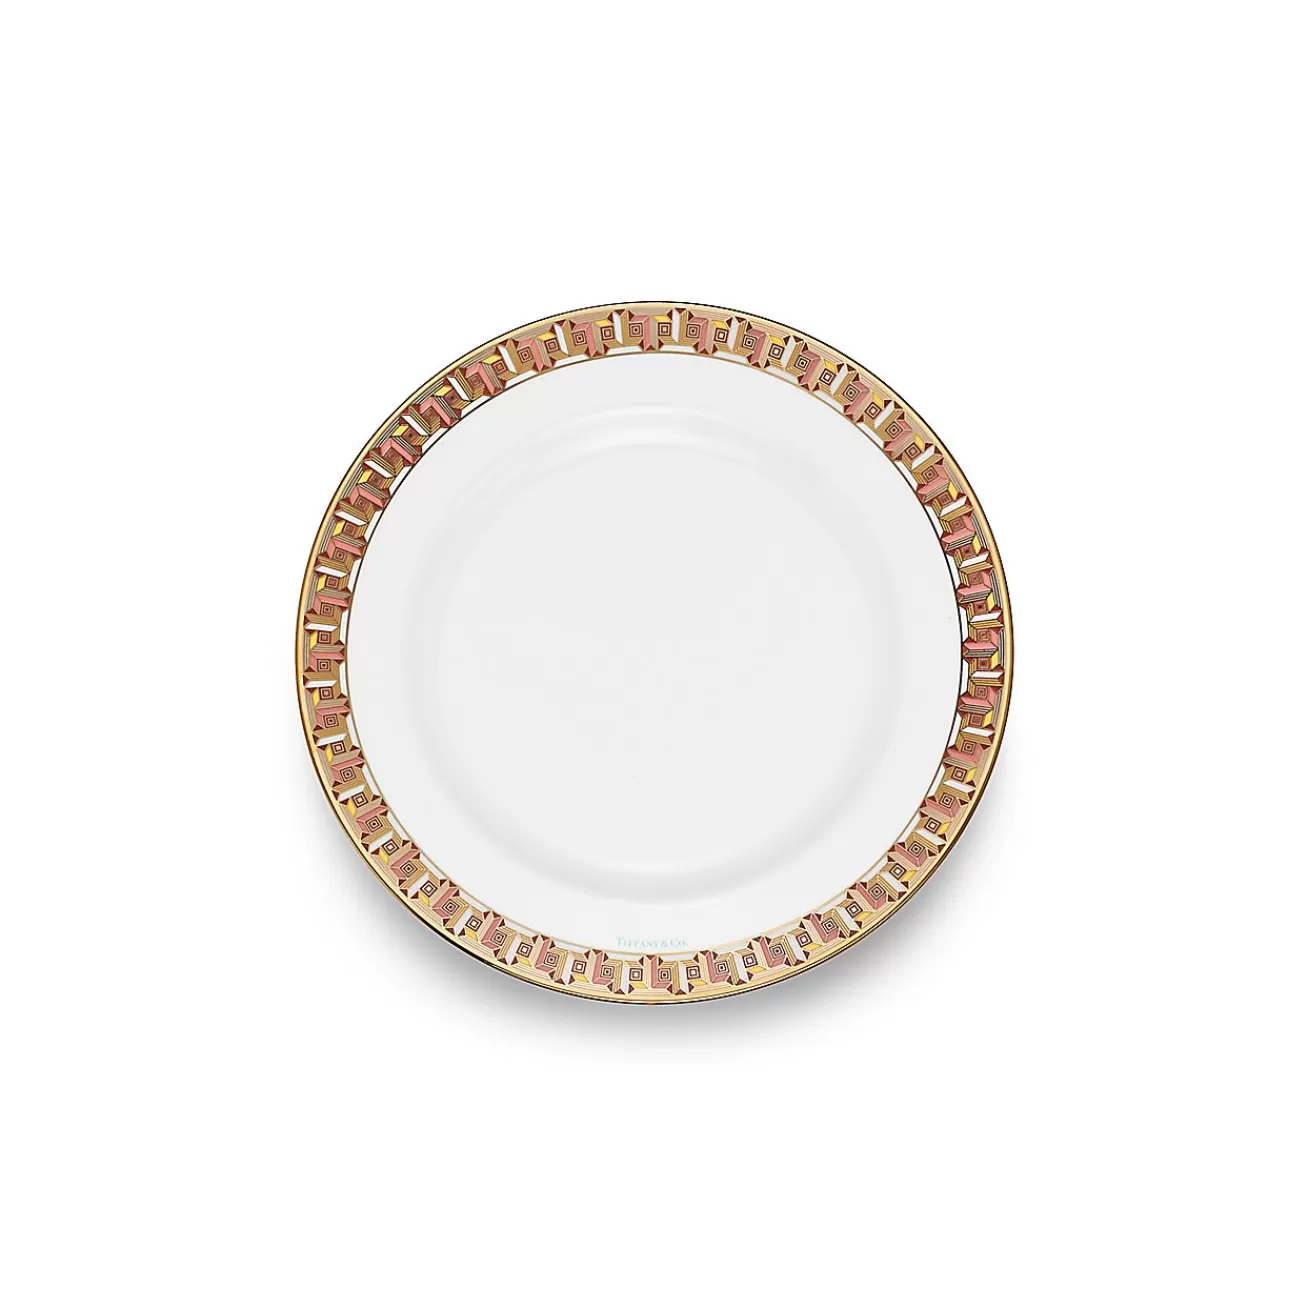 Tiffany & Co. Tiffany T True Bread and Butter Plate with a Hand-painted Gold Rim | ^ Tableware